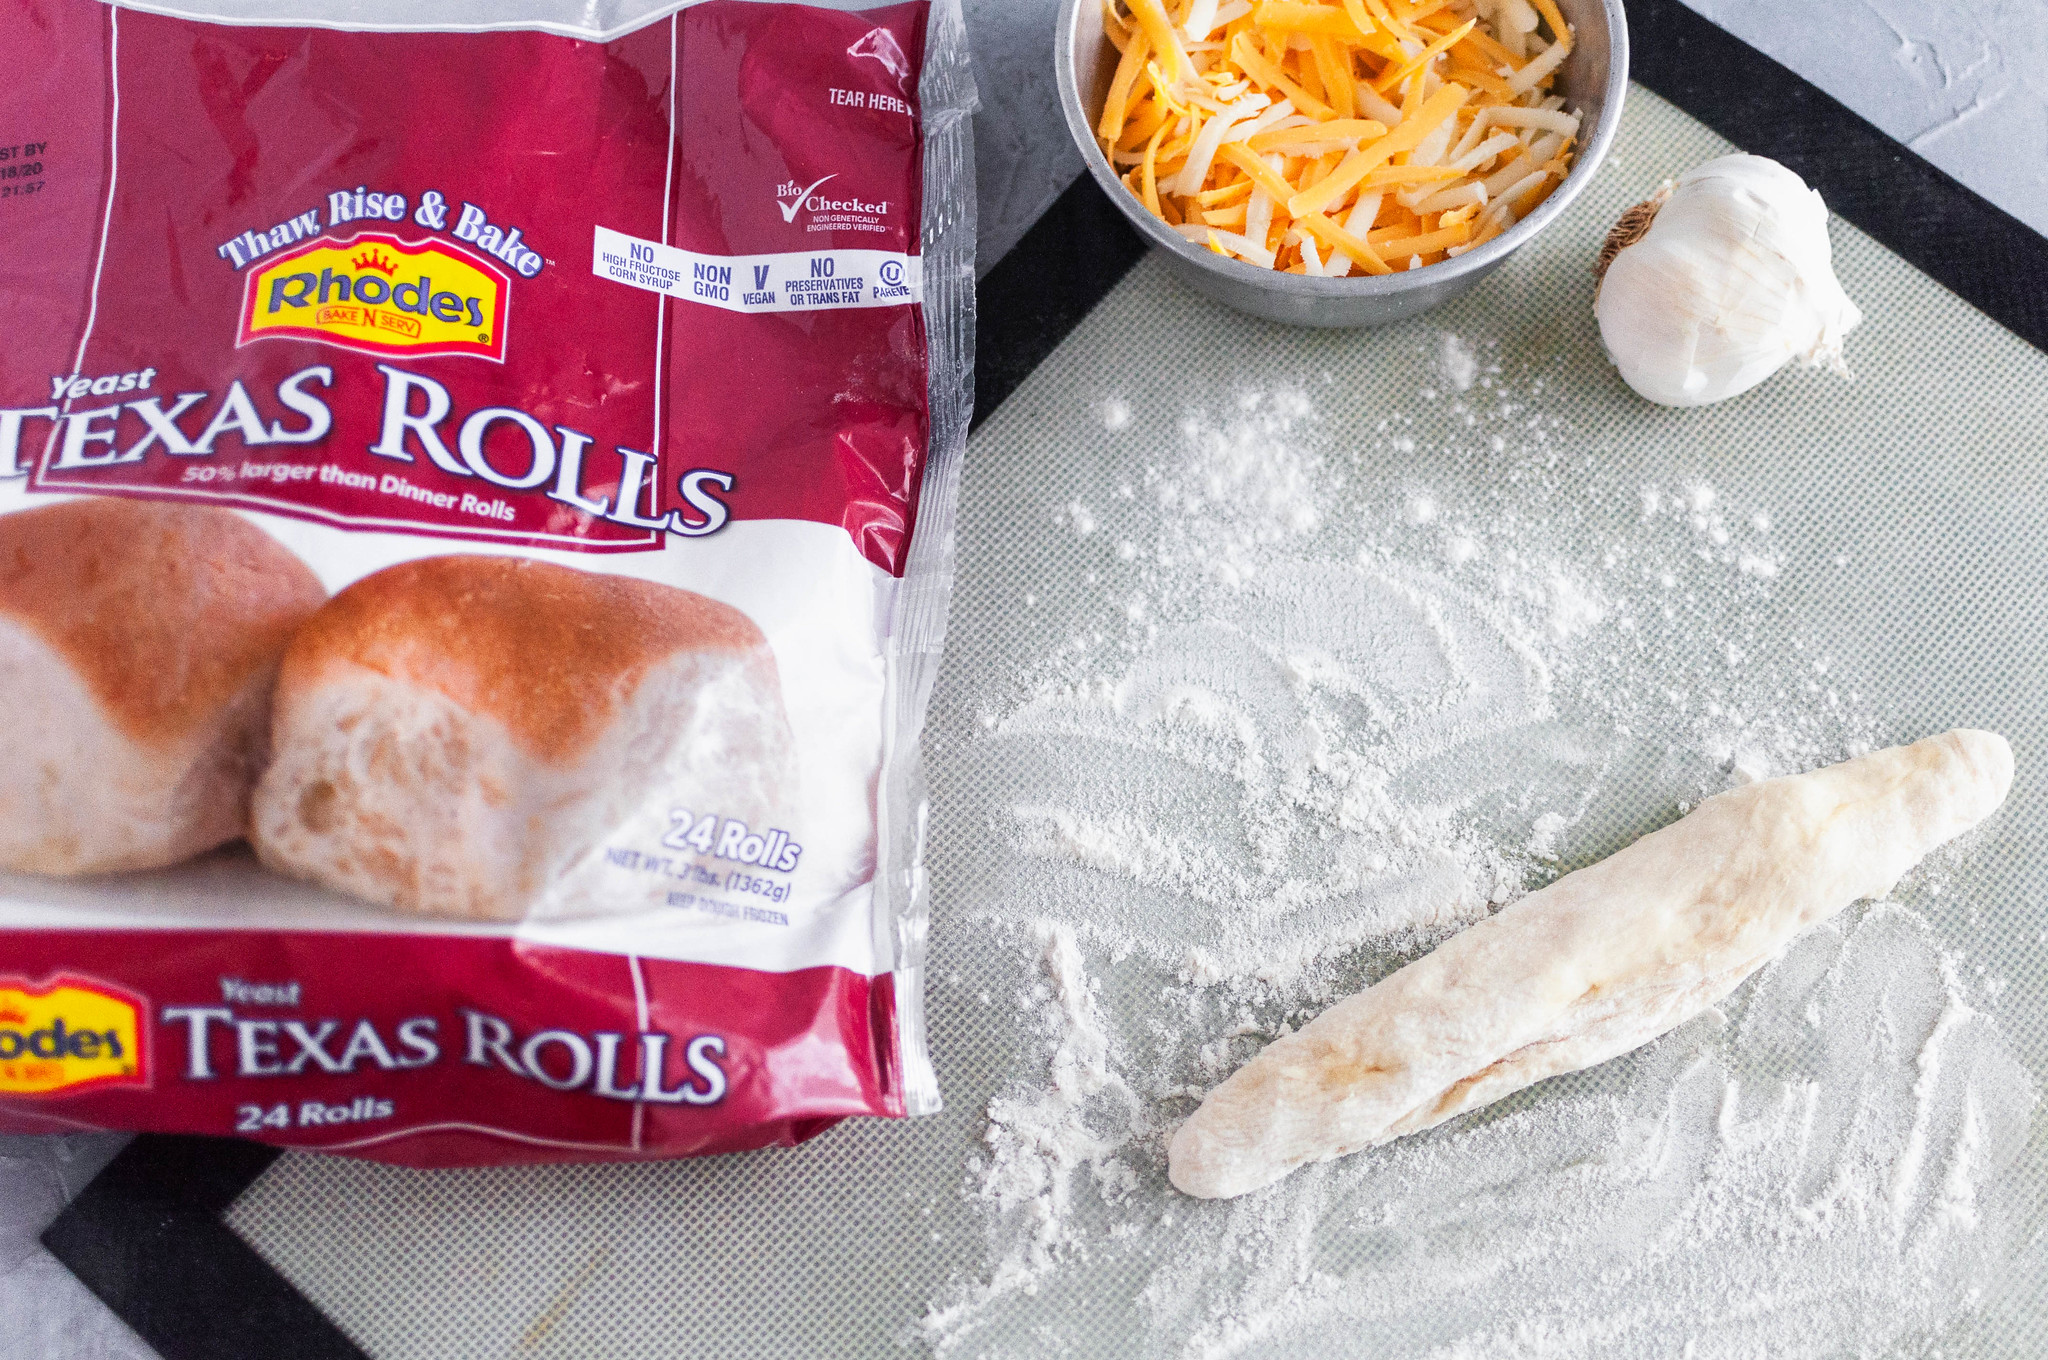 Make these simple, delicious, cheese stuffed Garlic Knots using Rhodes Bake-N-Serv Texas rolls for your next holiday dinner. Simple to make and taste homemade! Check out the step-by-step tutorial for these super simple rolls.